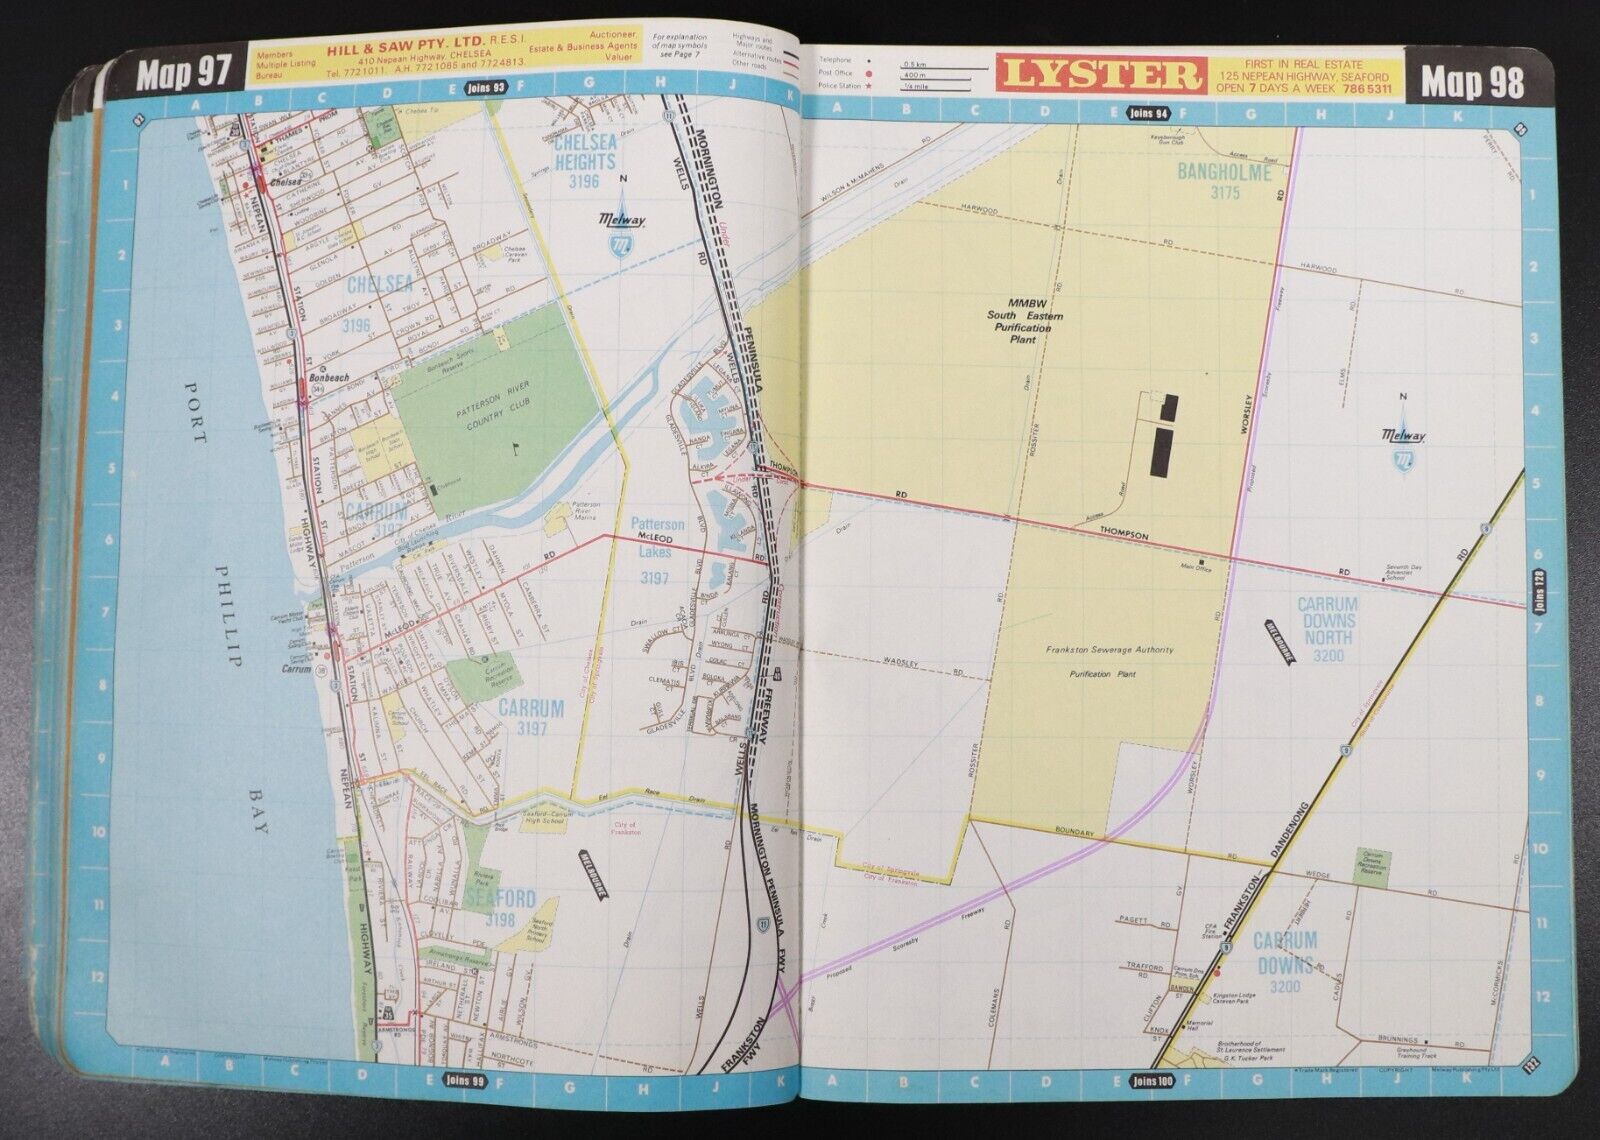 1978 Melway Street Directory Of Greater Melbourne Maps Book Melways 11th Edition